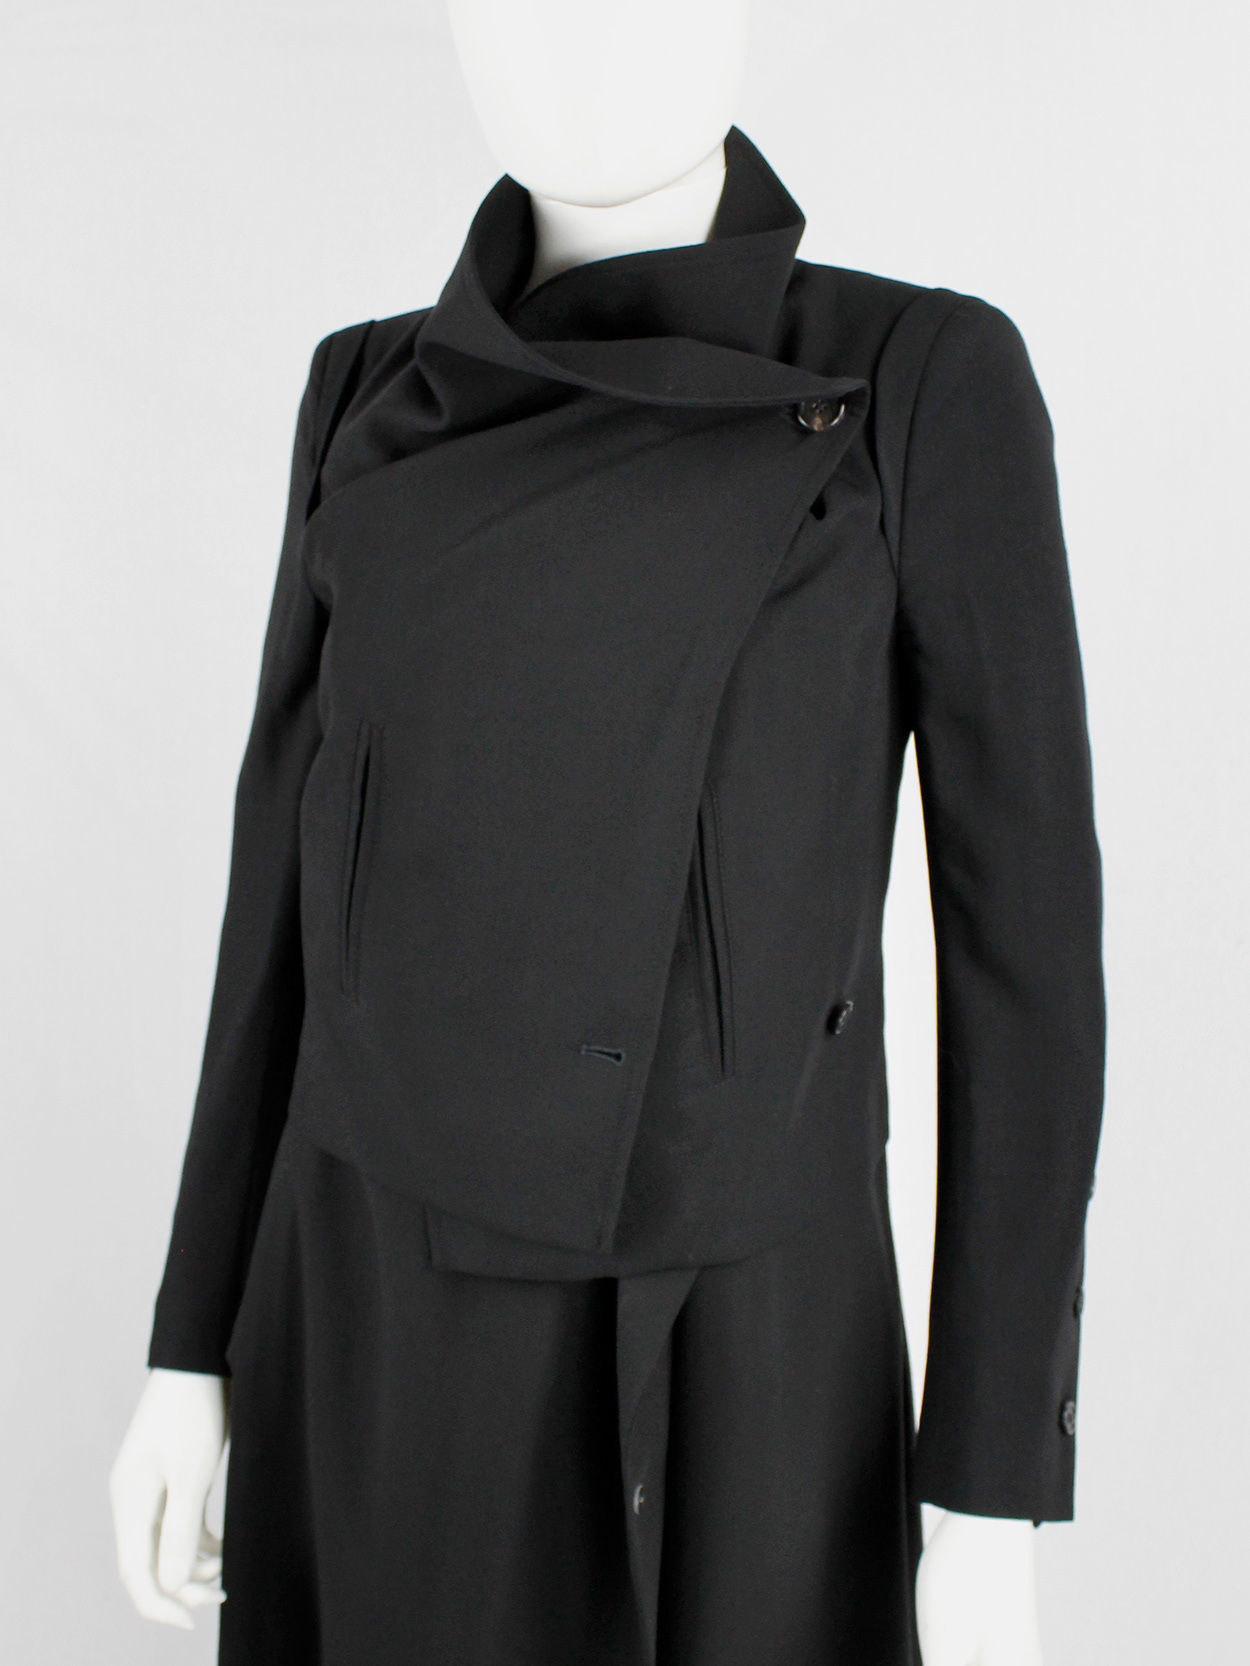 Ann Demeulemeester black jacket with buttons twisting around the ...